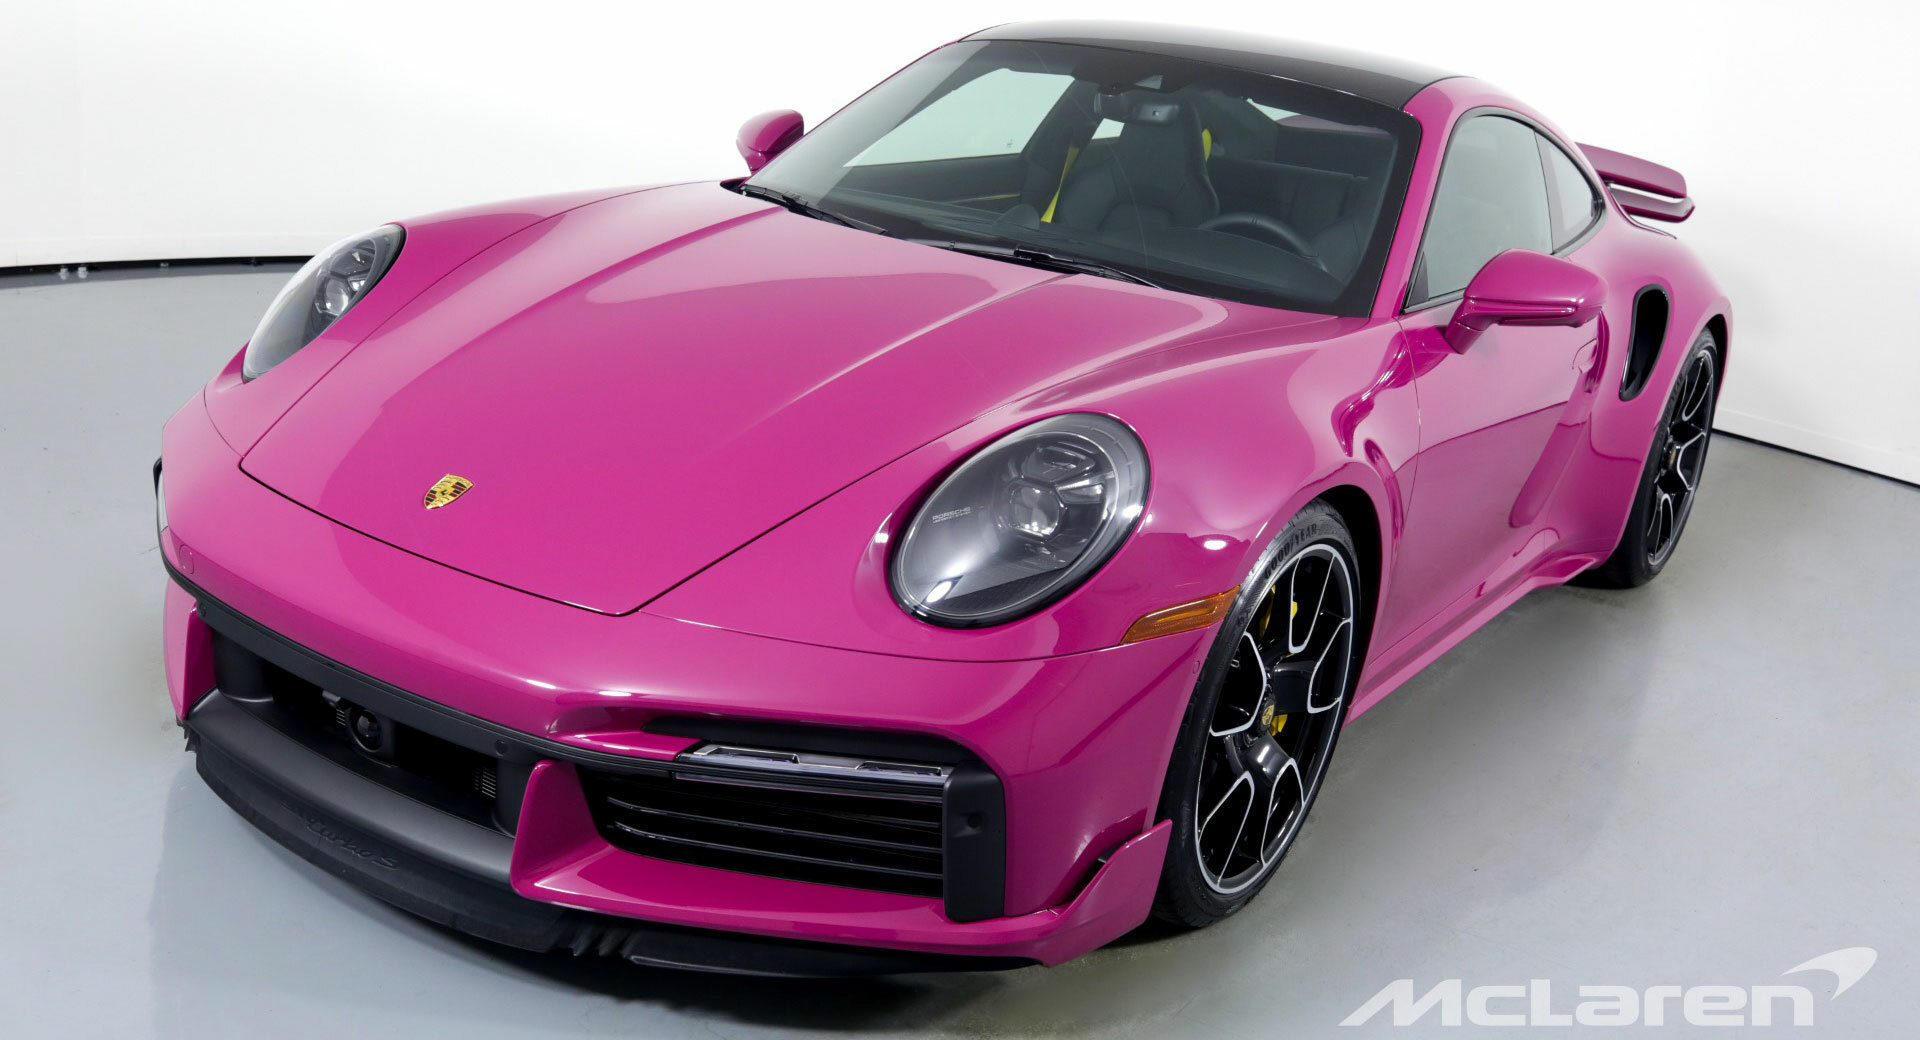 For $320k, Can You Handle This Porsche 911 Turbo S In Rubystone Red? |  Carscoops